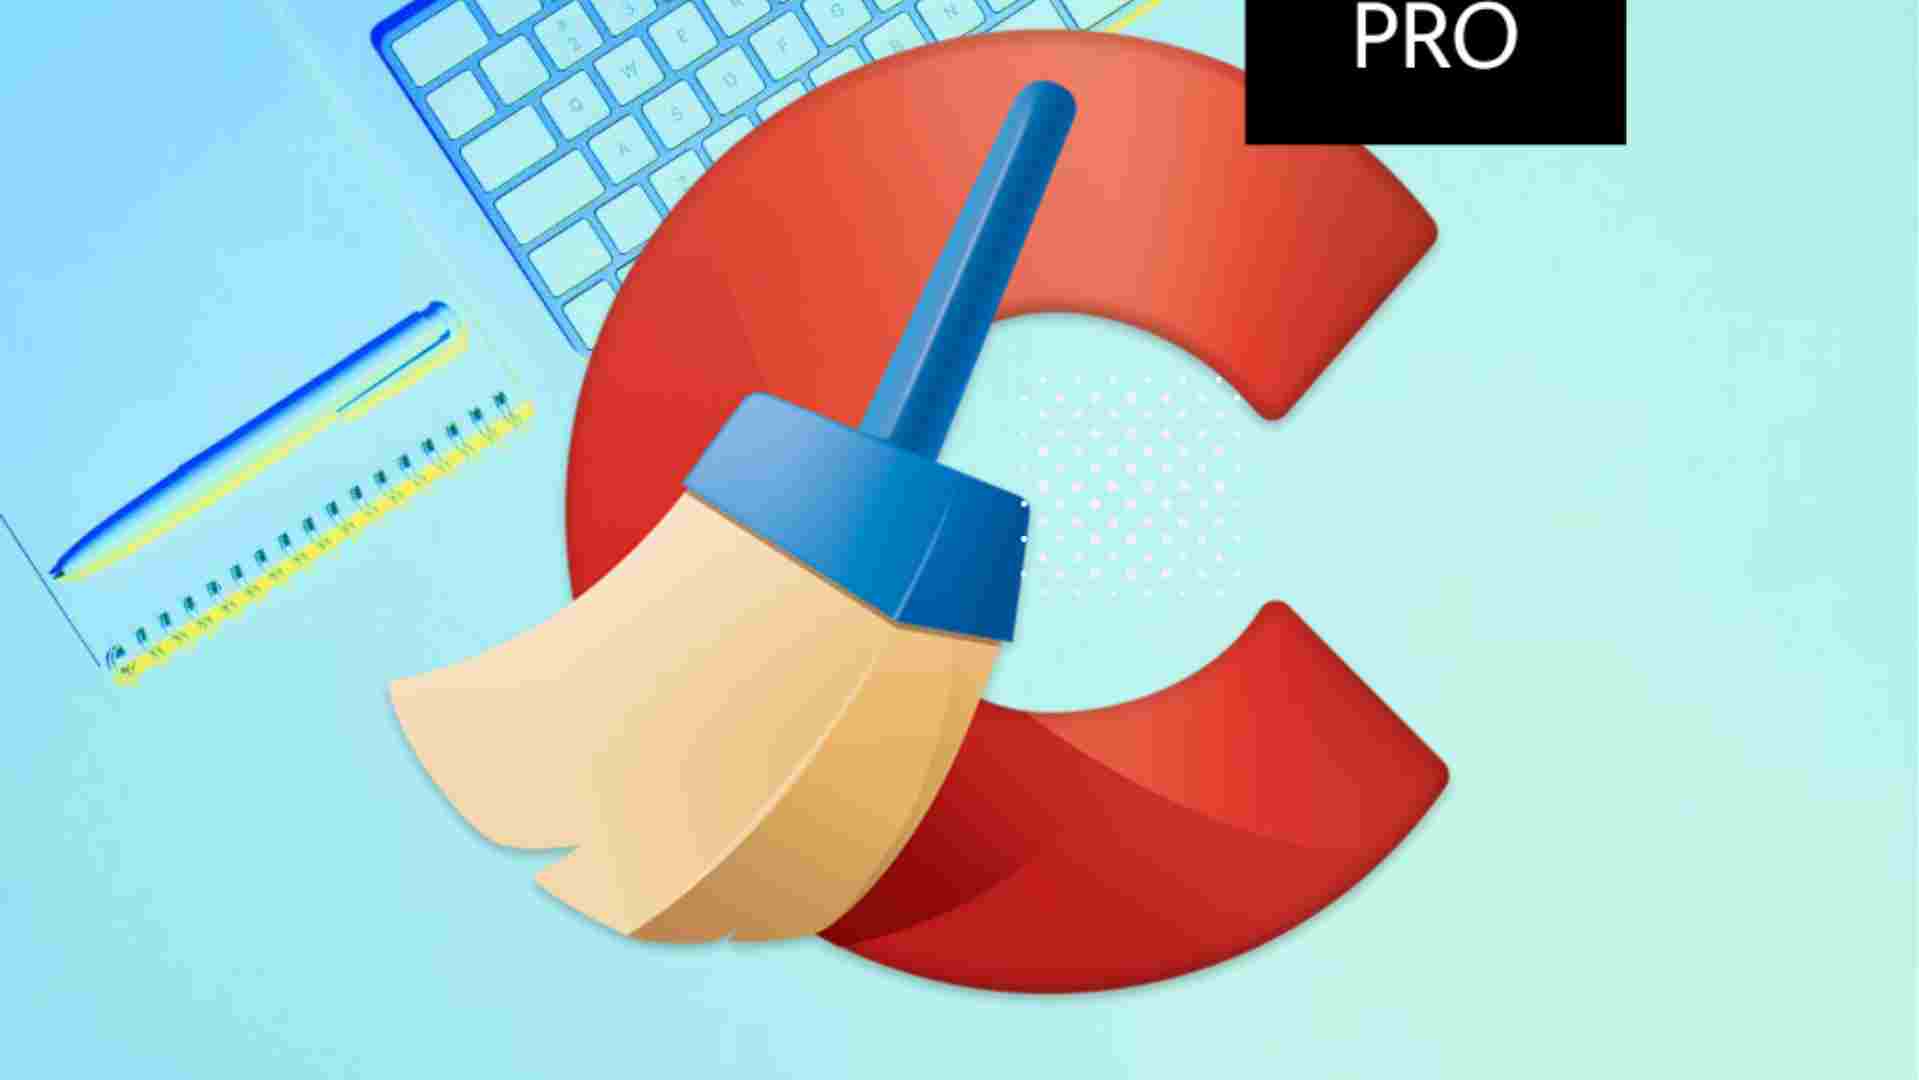 Ccleaner pro free download apk final cut pro cracked version download